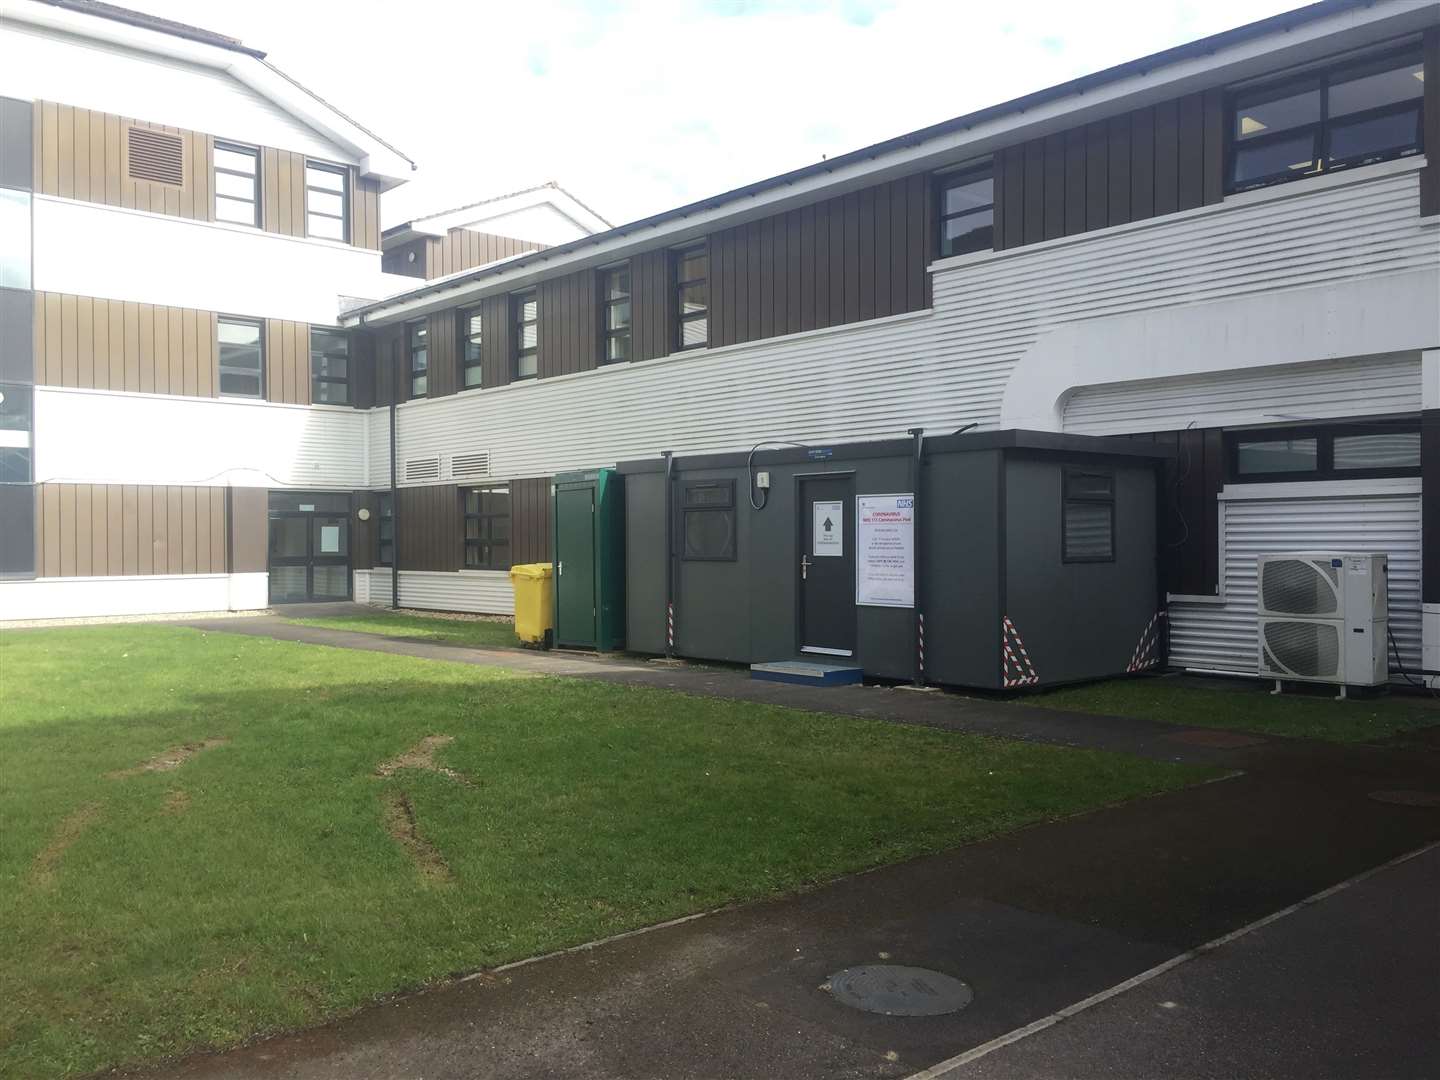 The pod at Maidstone Hospital is in a courtyard area